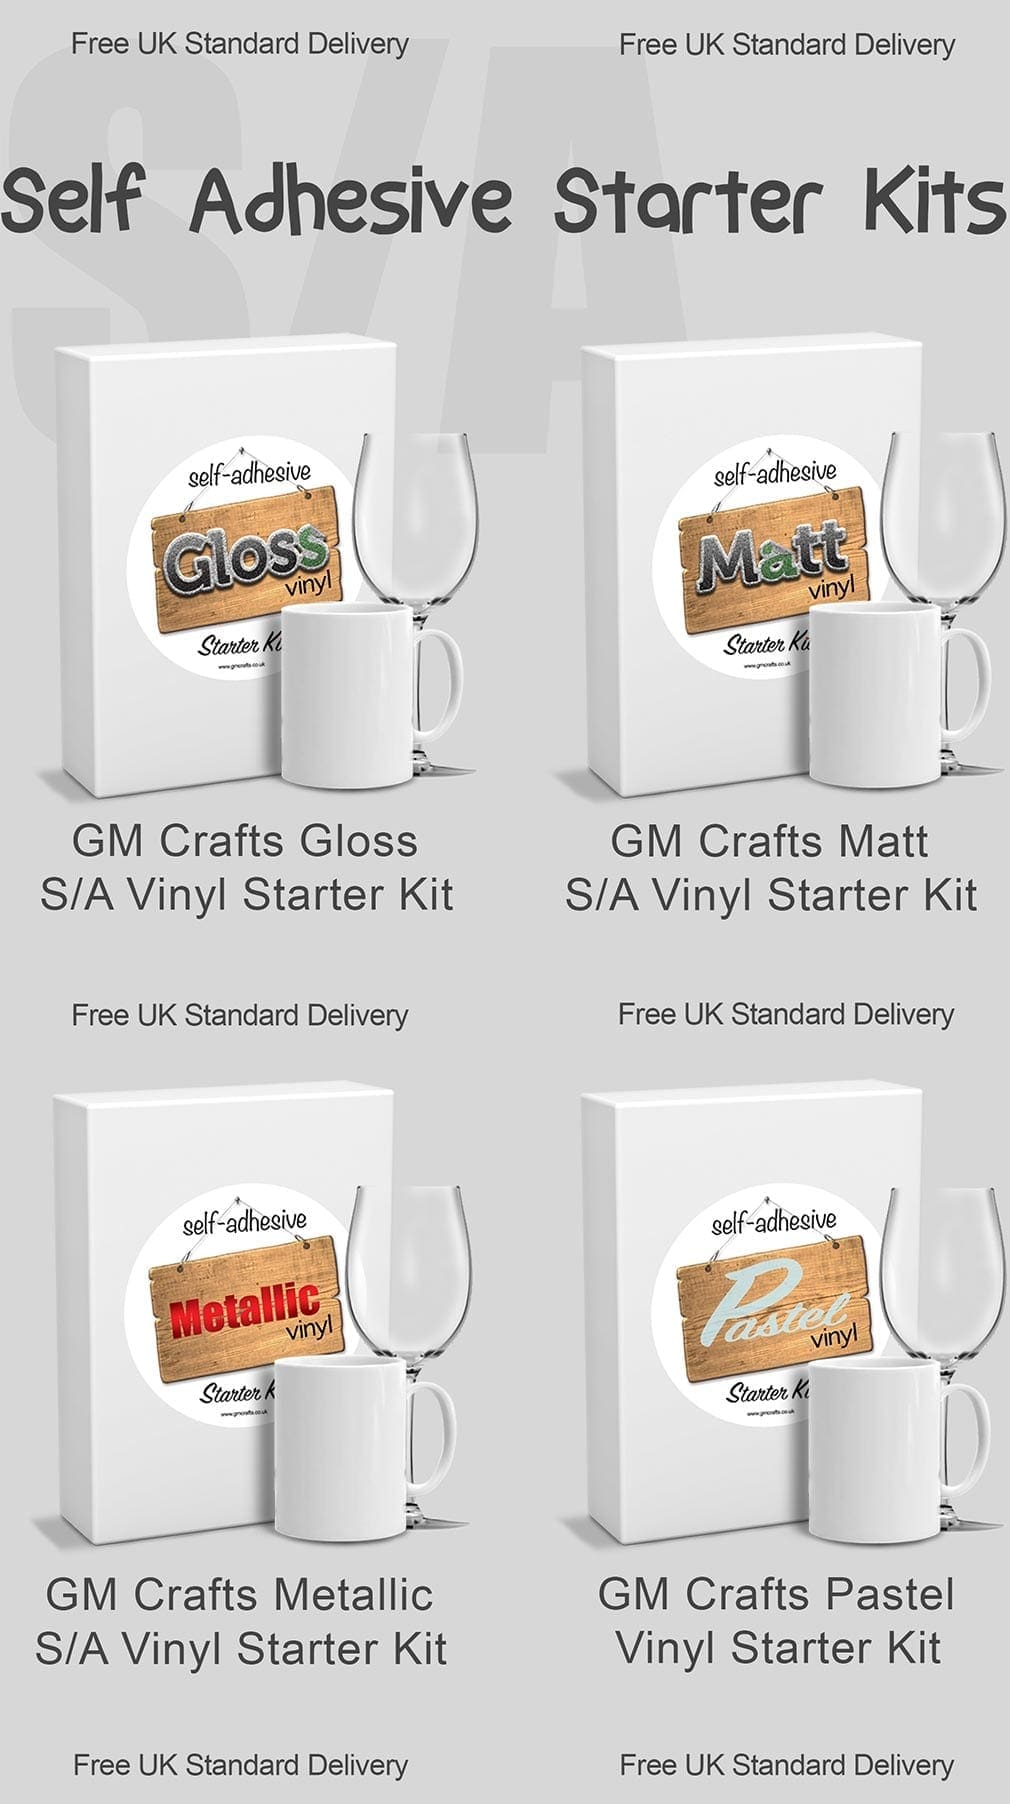 Mobile-Starter-Kits-Page-May-20-5